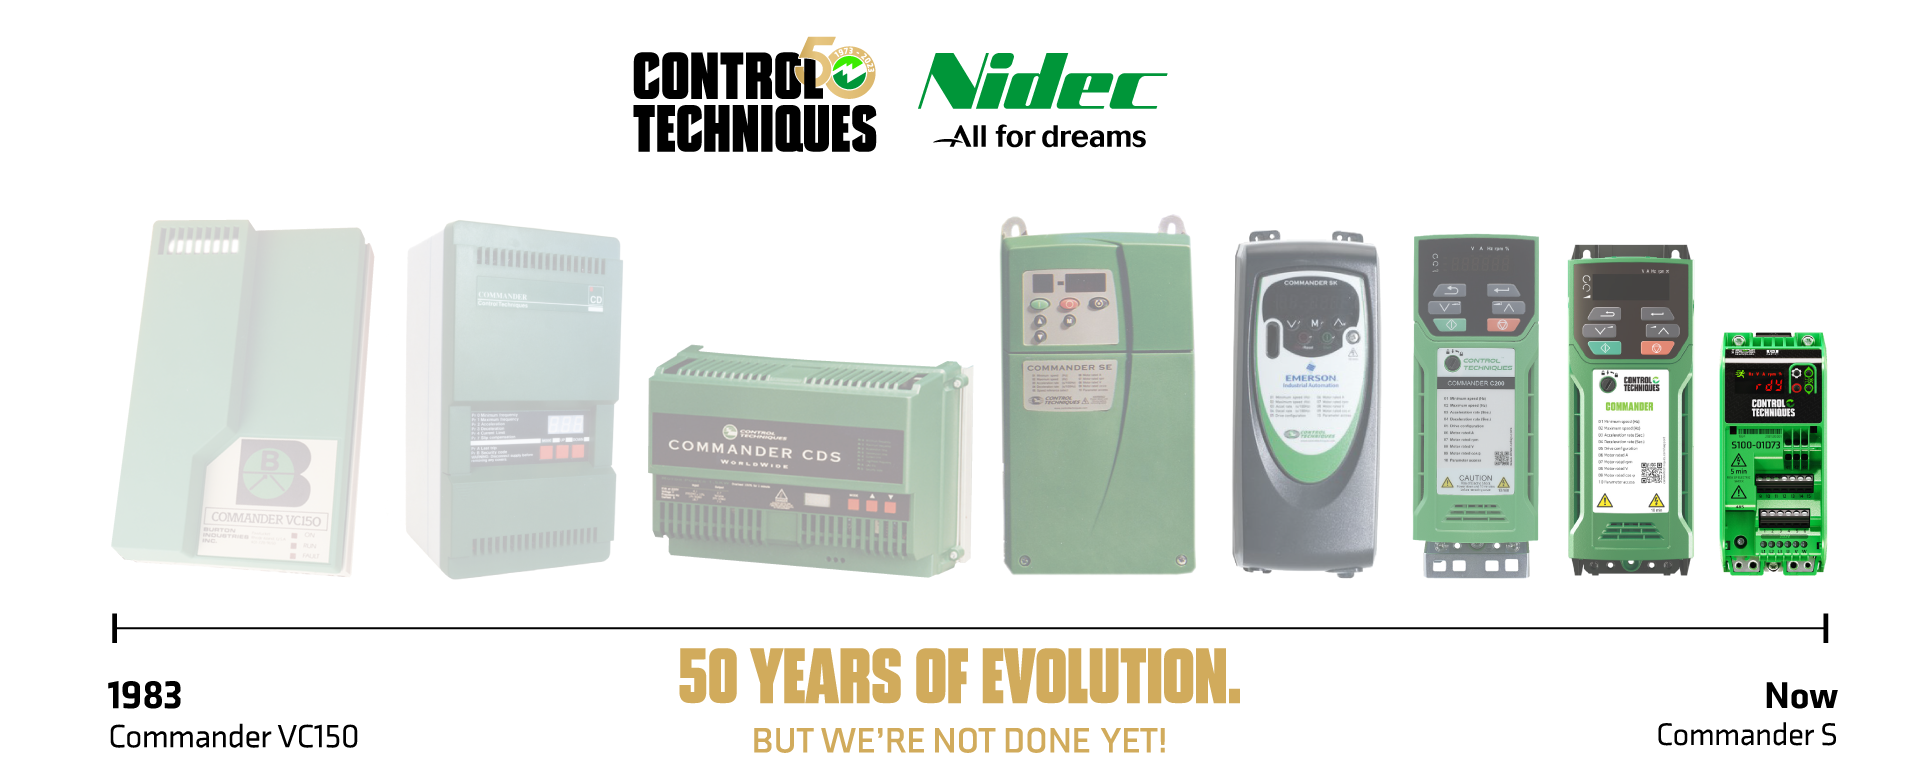 Control-Techniques-History-50-Years-of-Evolution